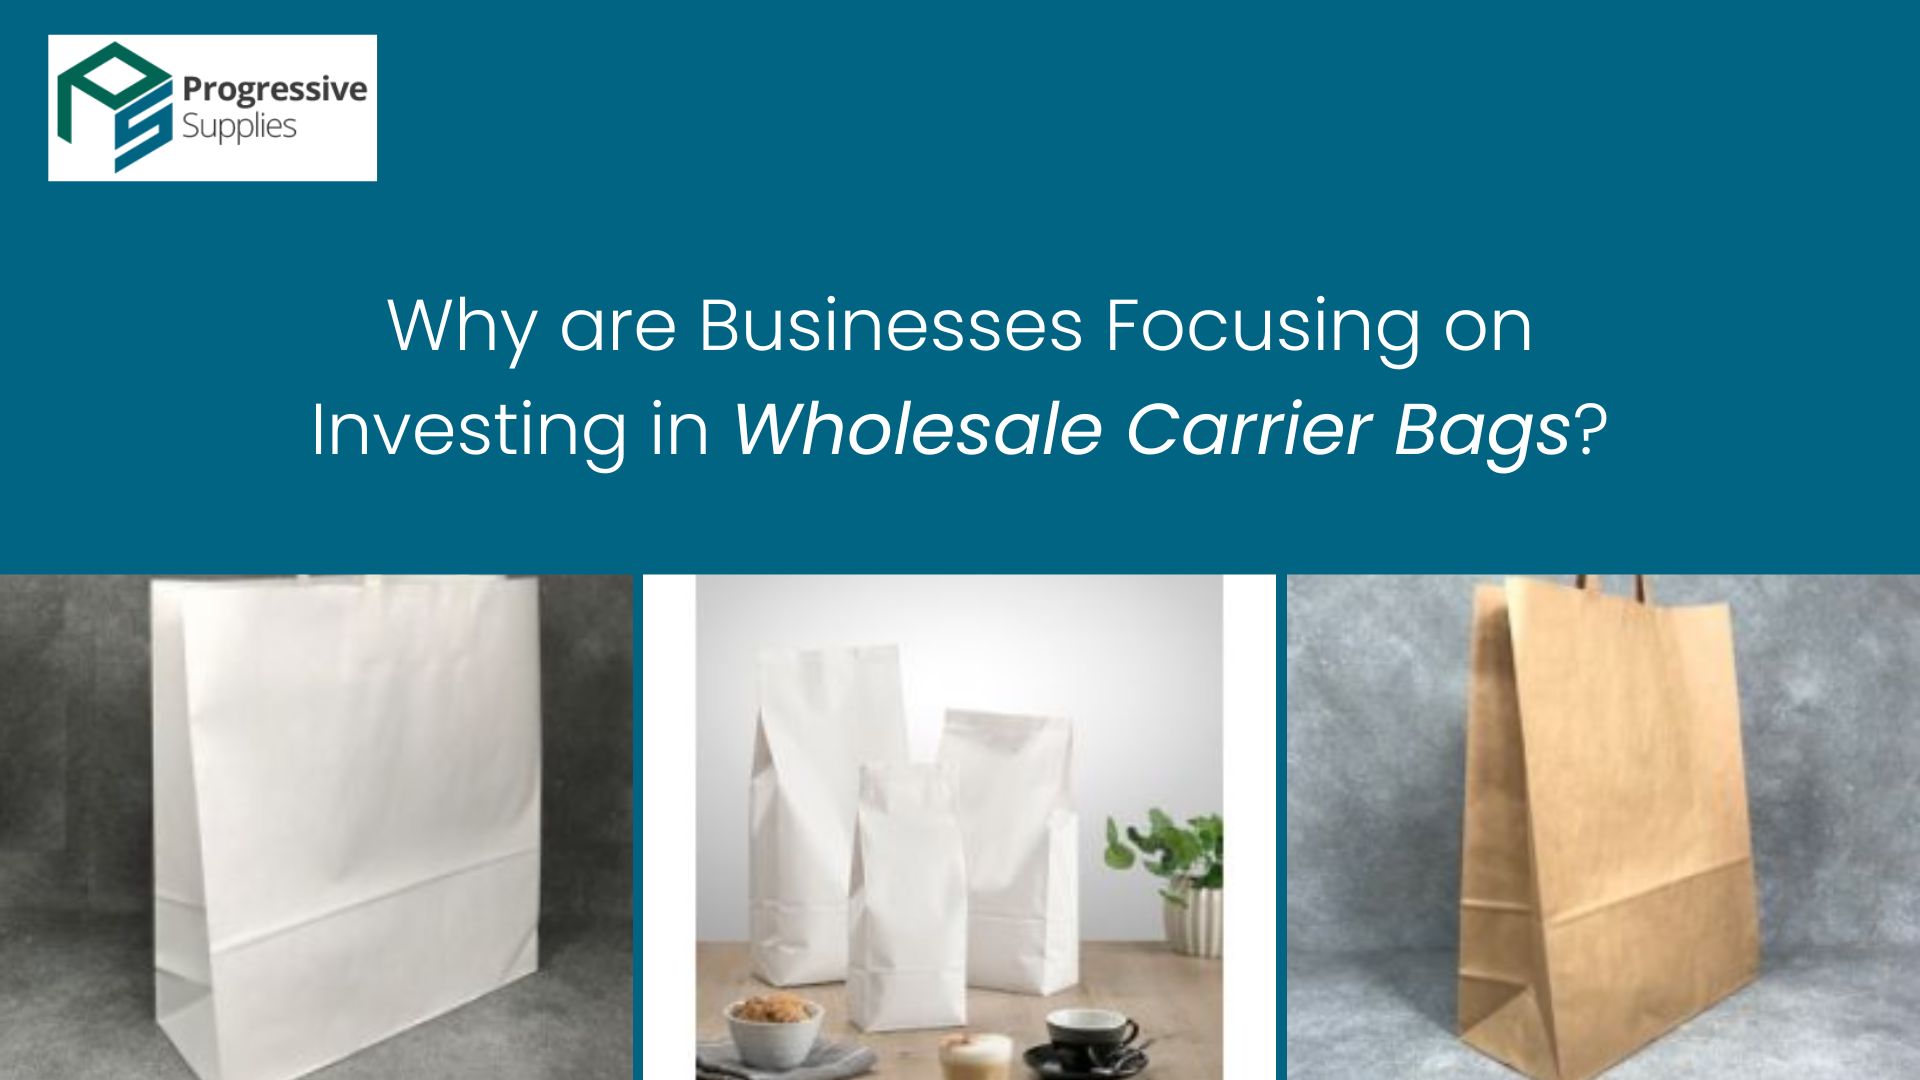 Why are Businesses Focusing on Investing in Wholesale Carrier Bags?